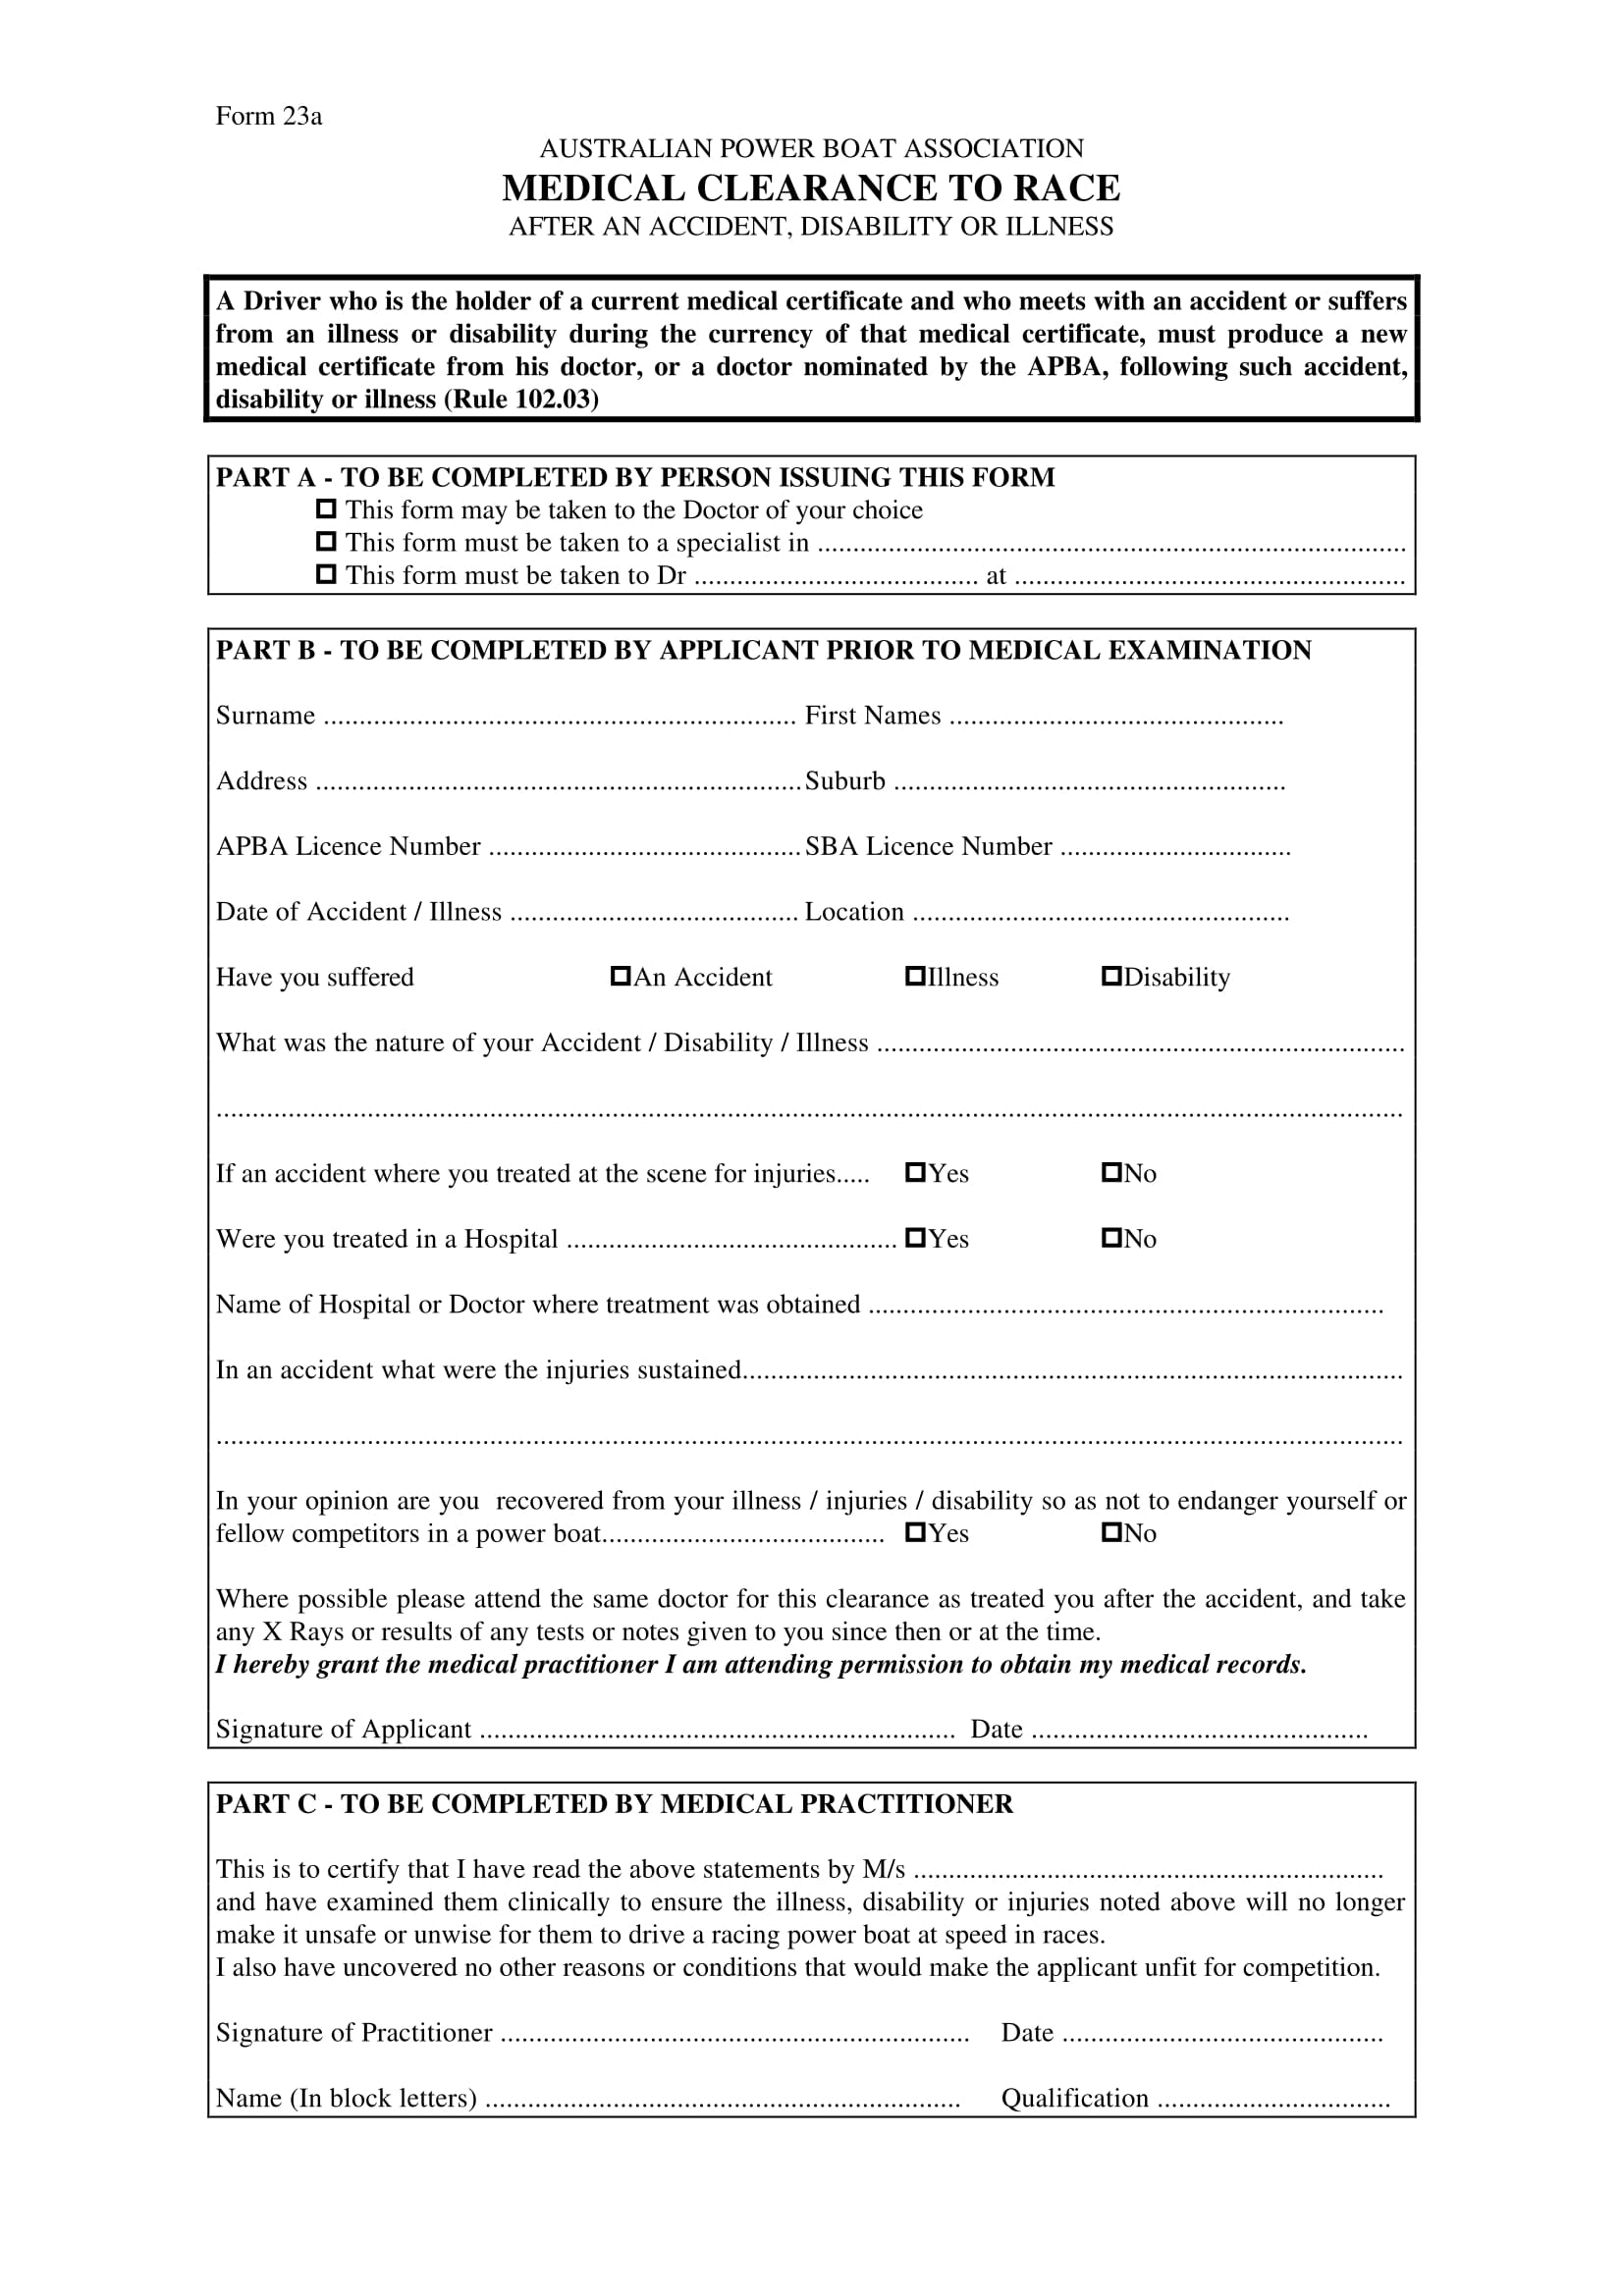 boat driver medical clearance form 1